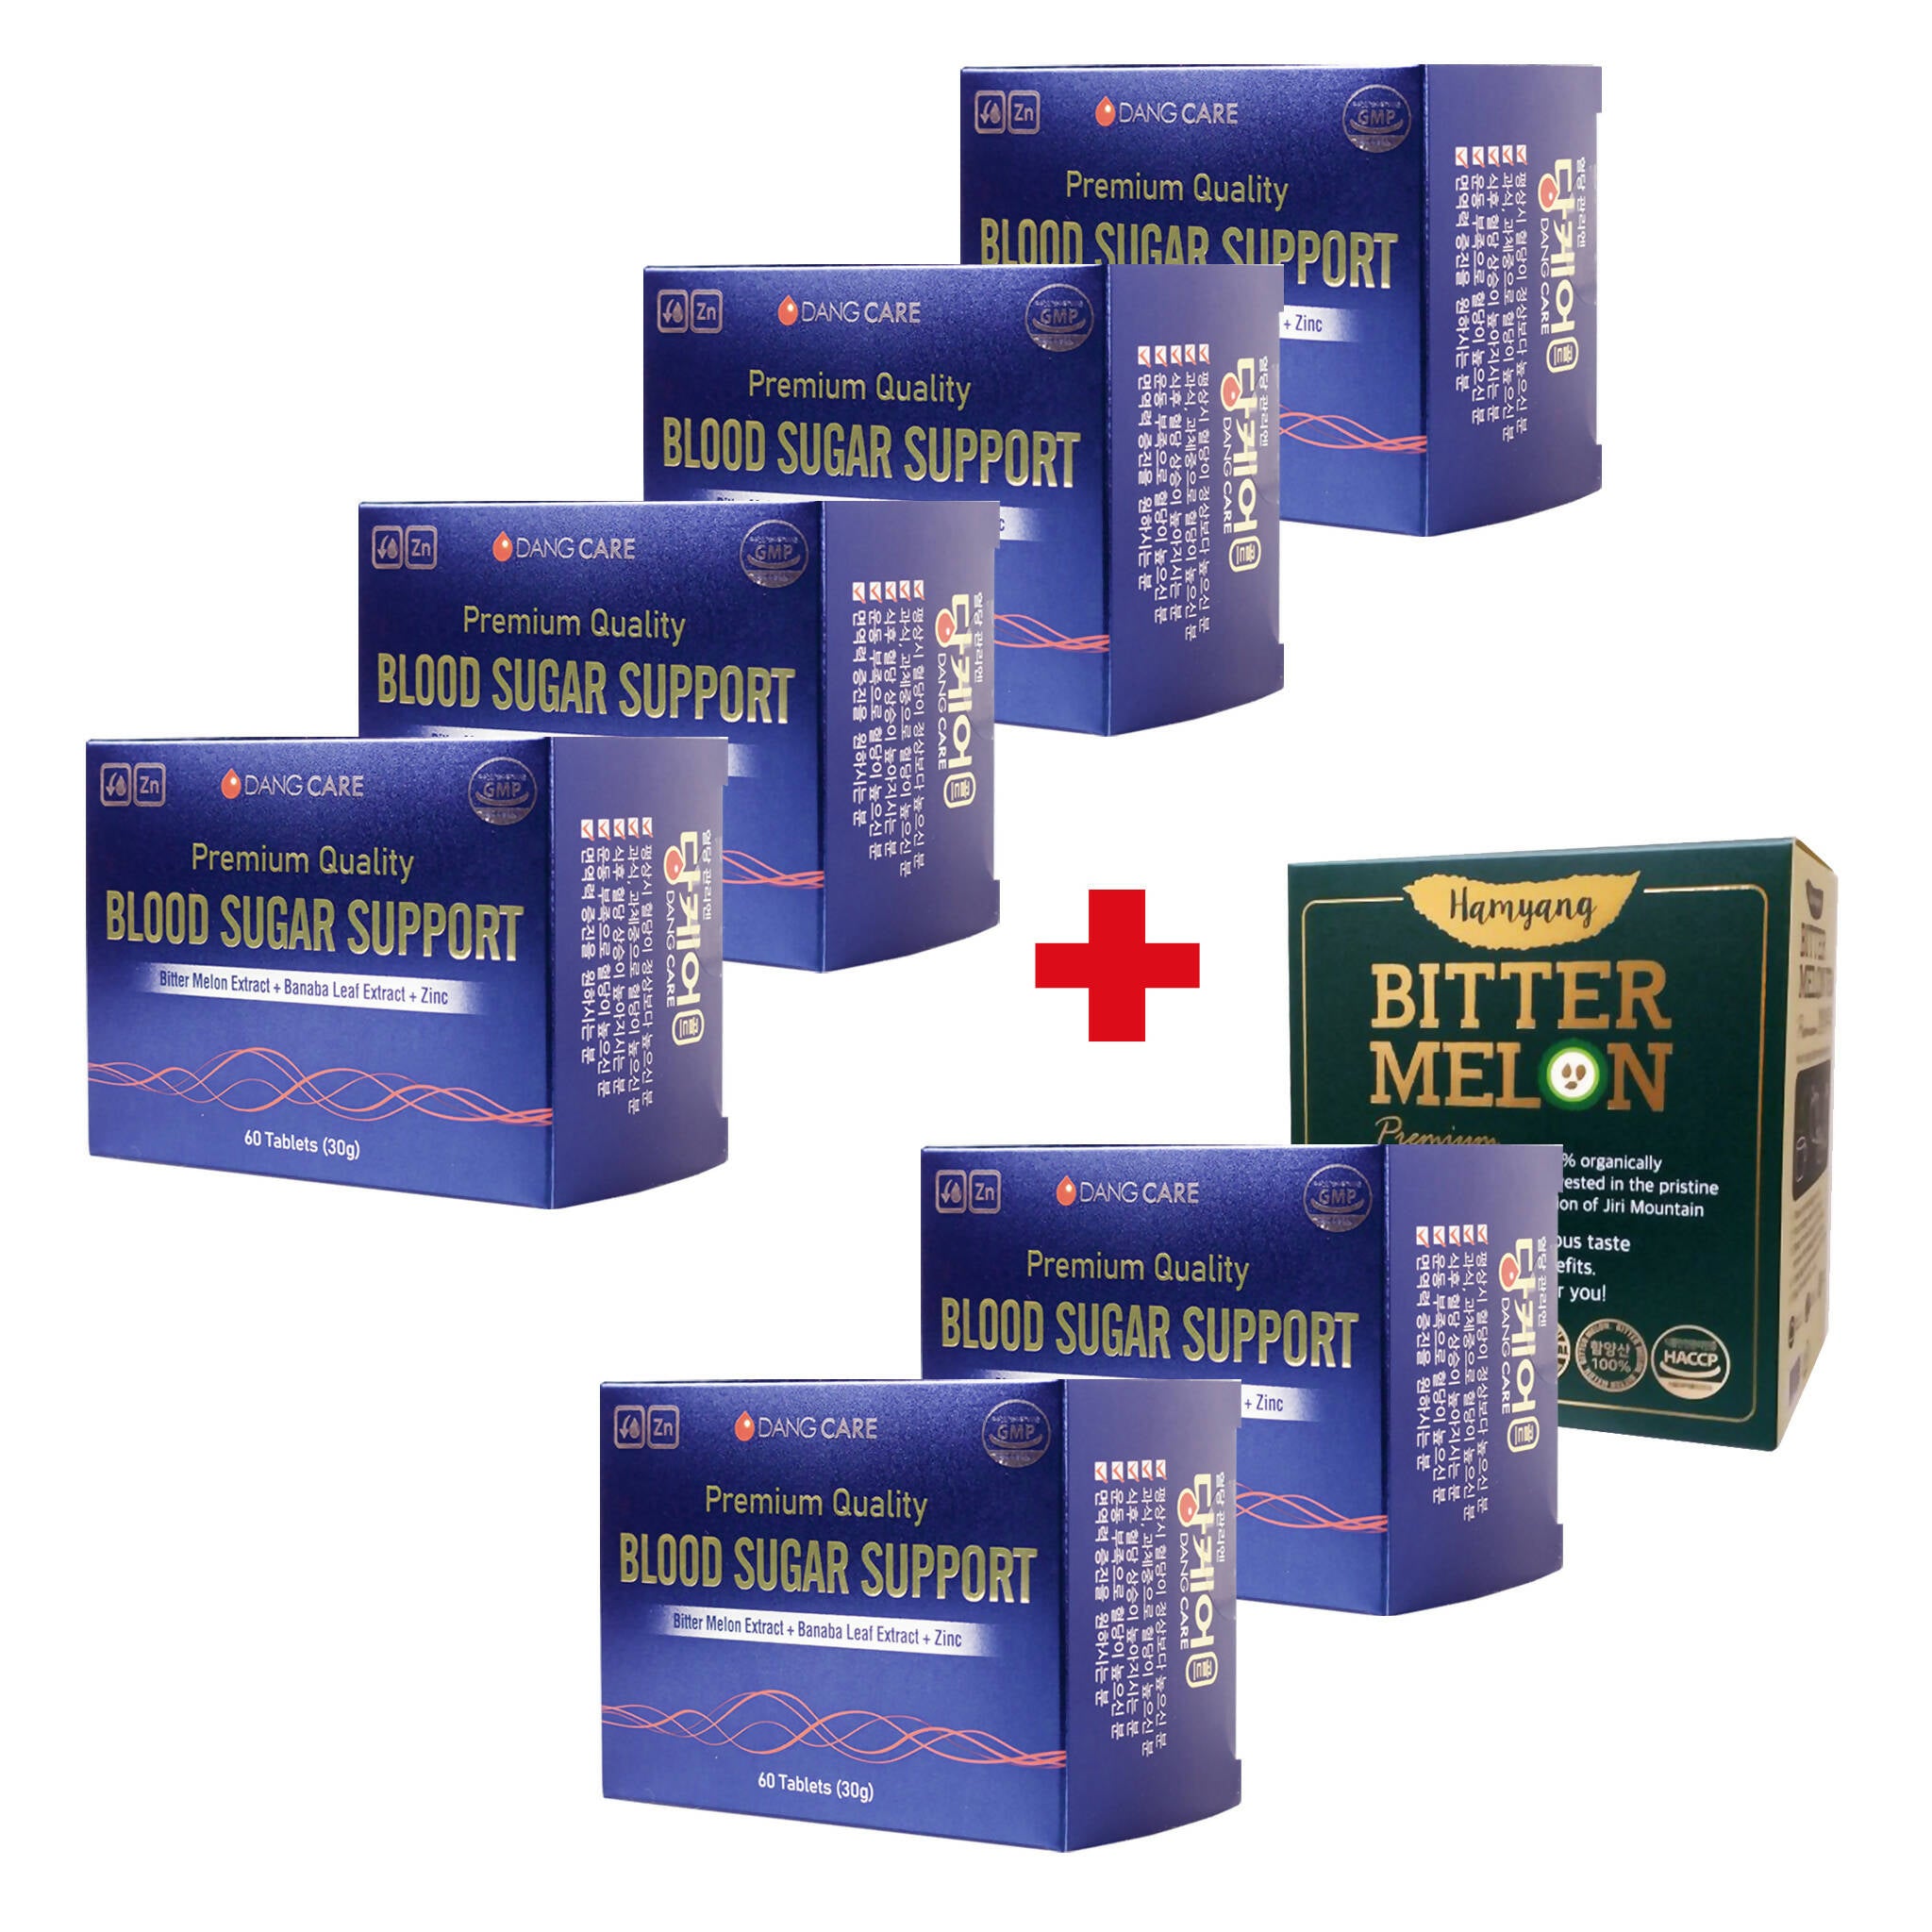 [Best Seller] 4 Boxes of DangCare Blood Glucose Support (60 Tablets) + 2 Box Dangcare Gold Free + Premium Bitter Melon Tea 1 Box Free!~~!!